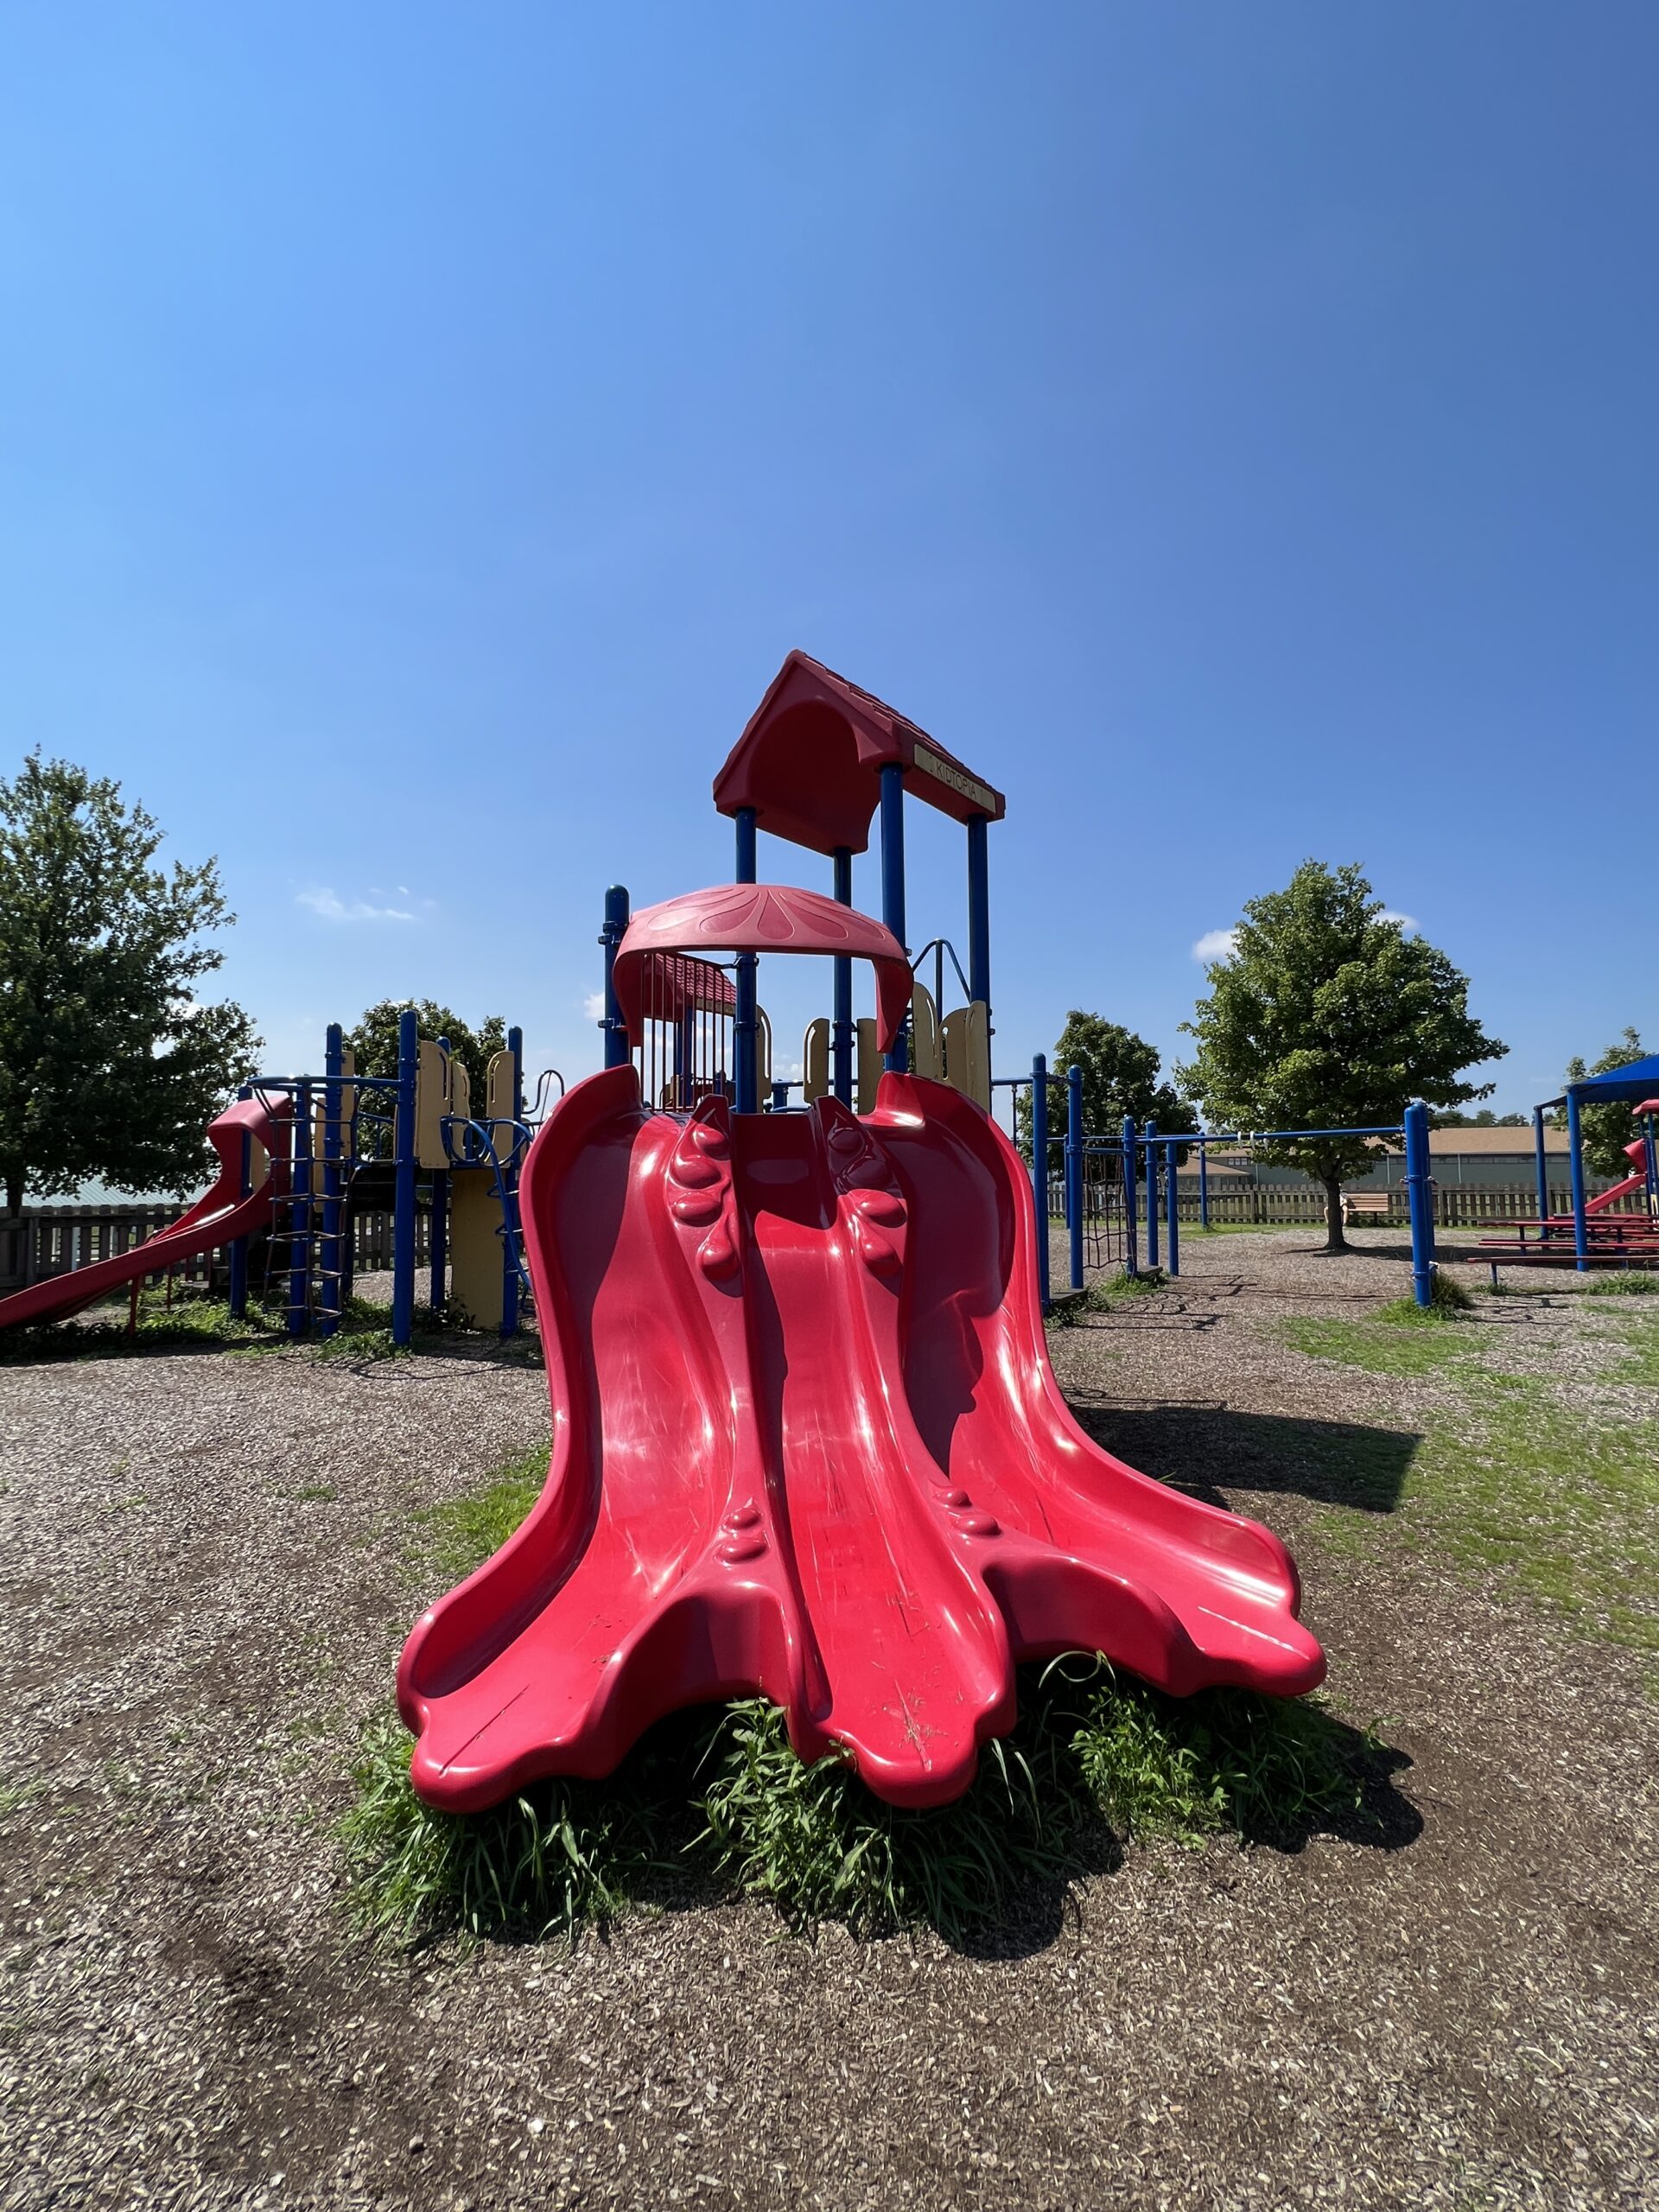 Alexandria Township Park Playground in Milford NJ - SLIDES - wavy side by side slides TALL image